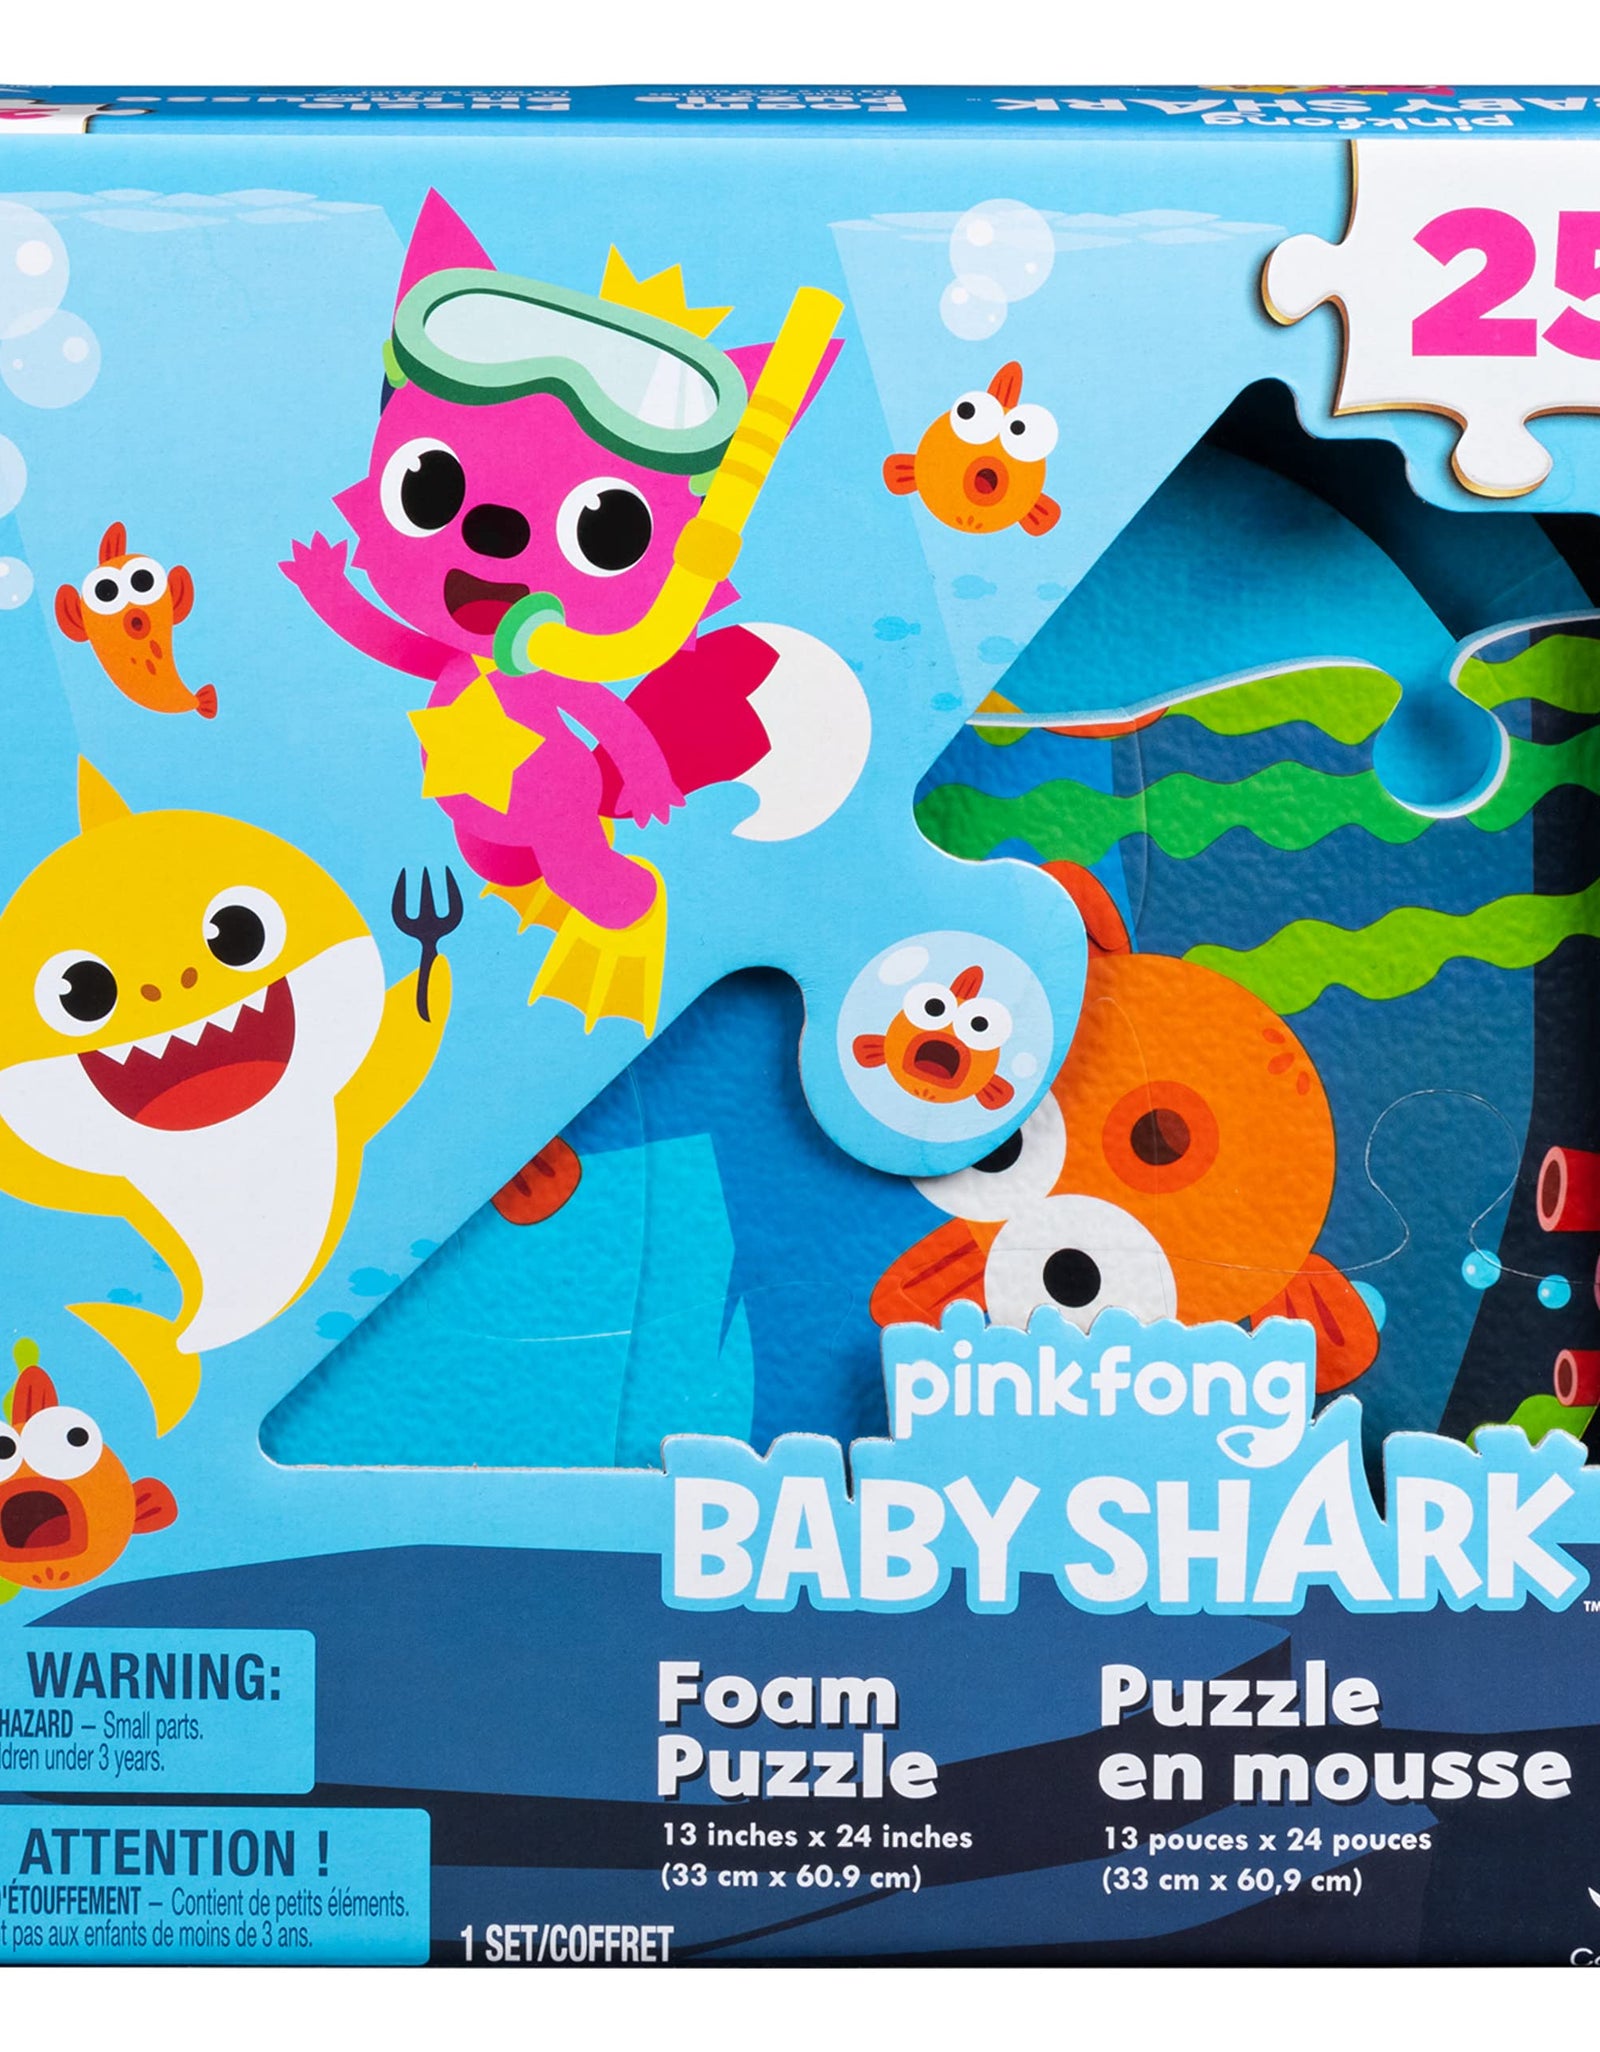 Pinkfong Baby Shark Let's Go Hunt Musical Fishing Game Montessori Learning Educational Toy Preschool Board Game, for Families and Kids Ages 4 and Up